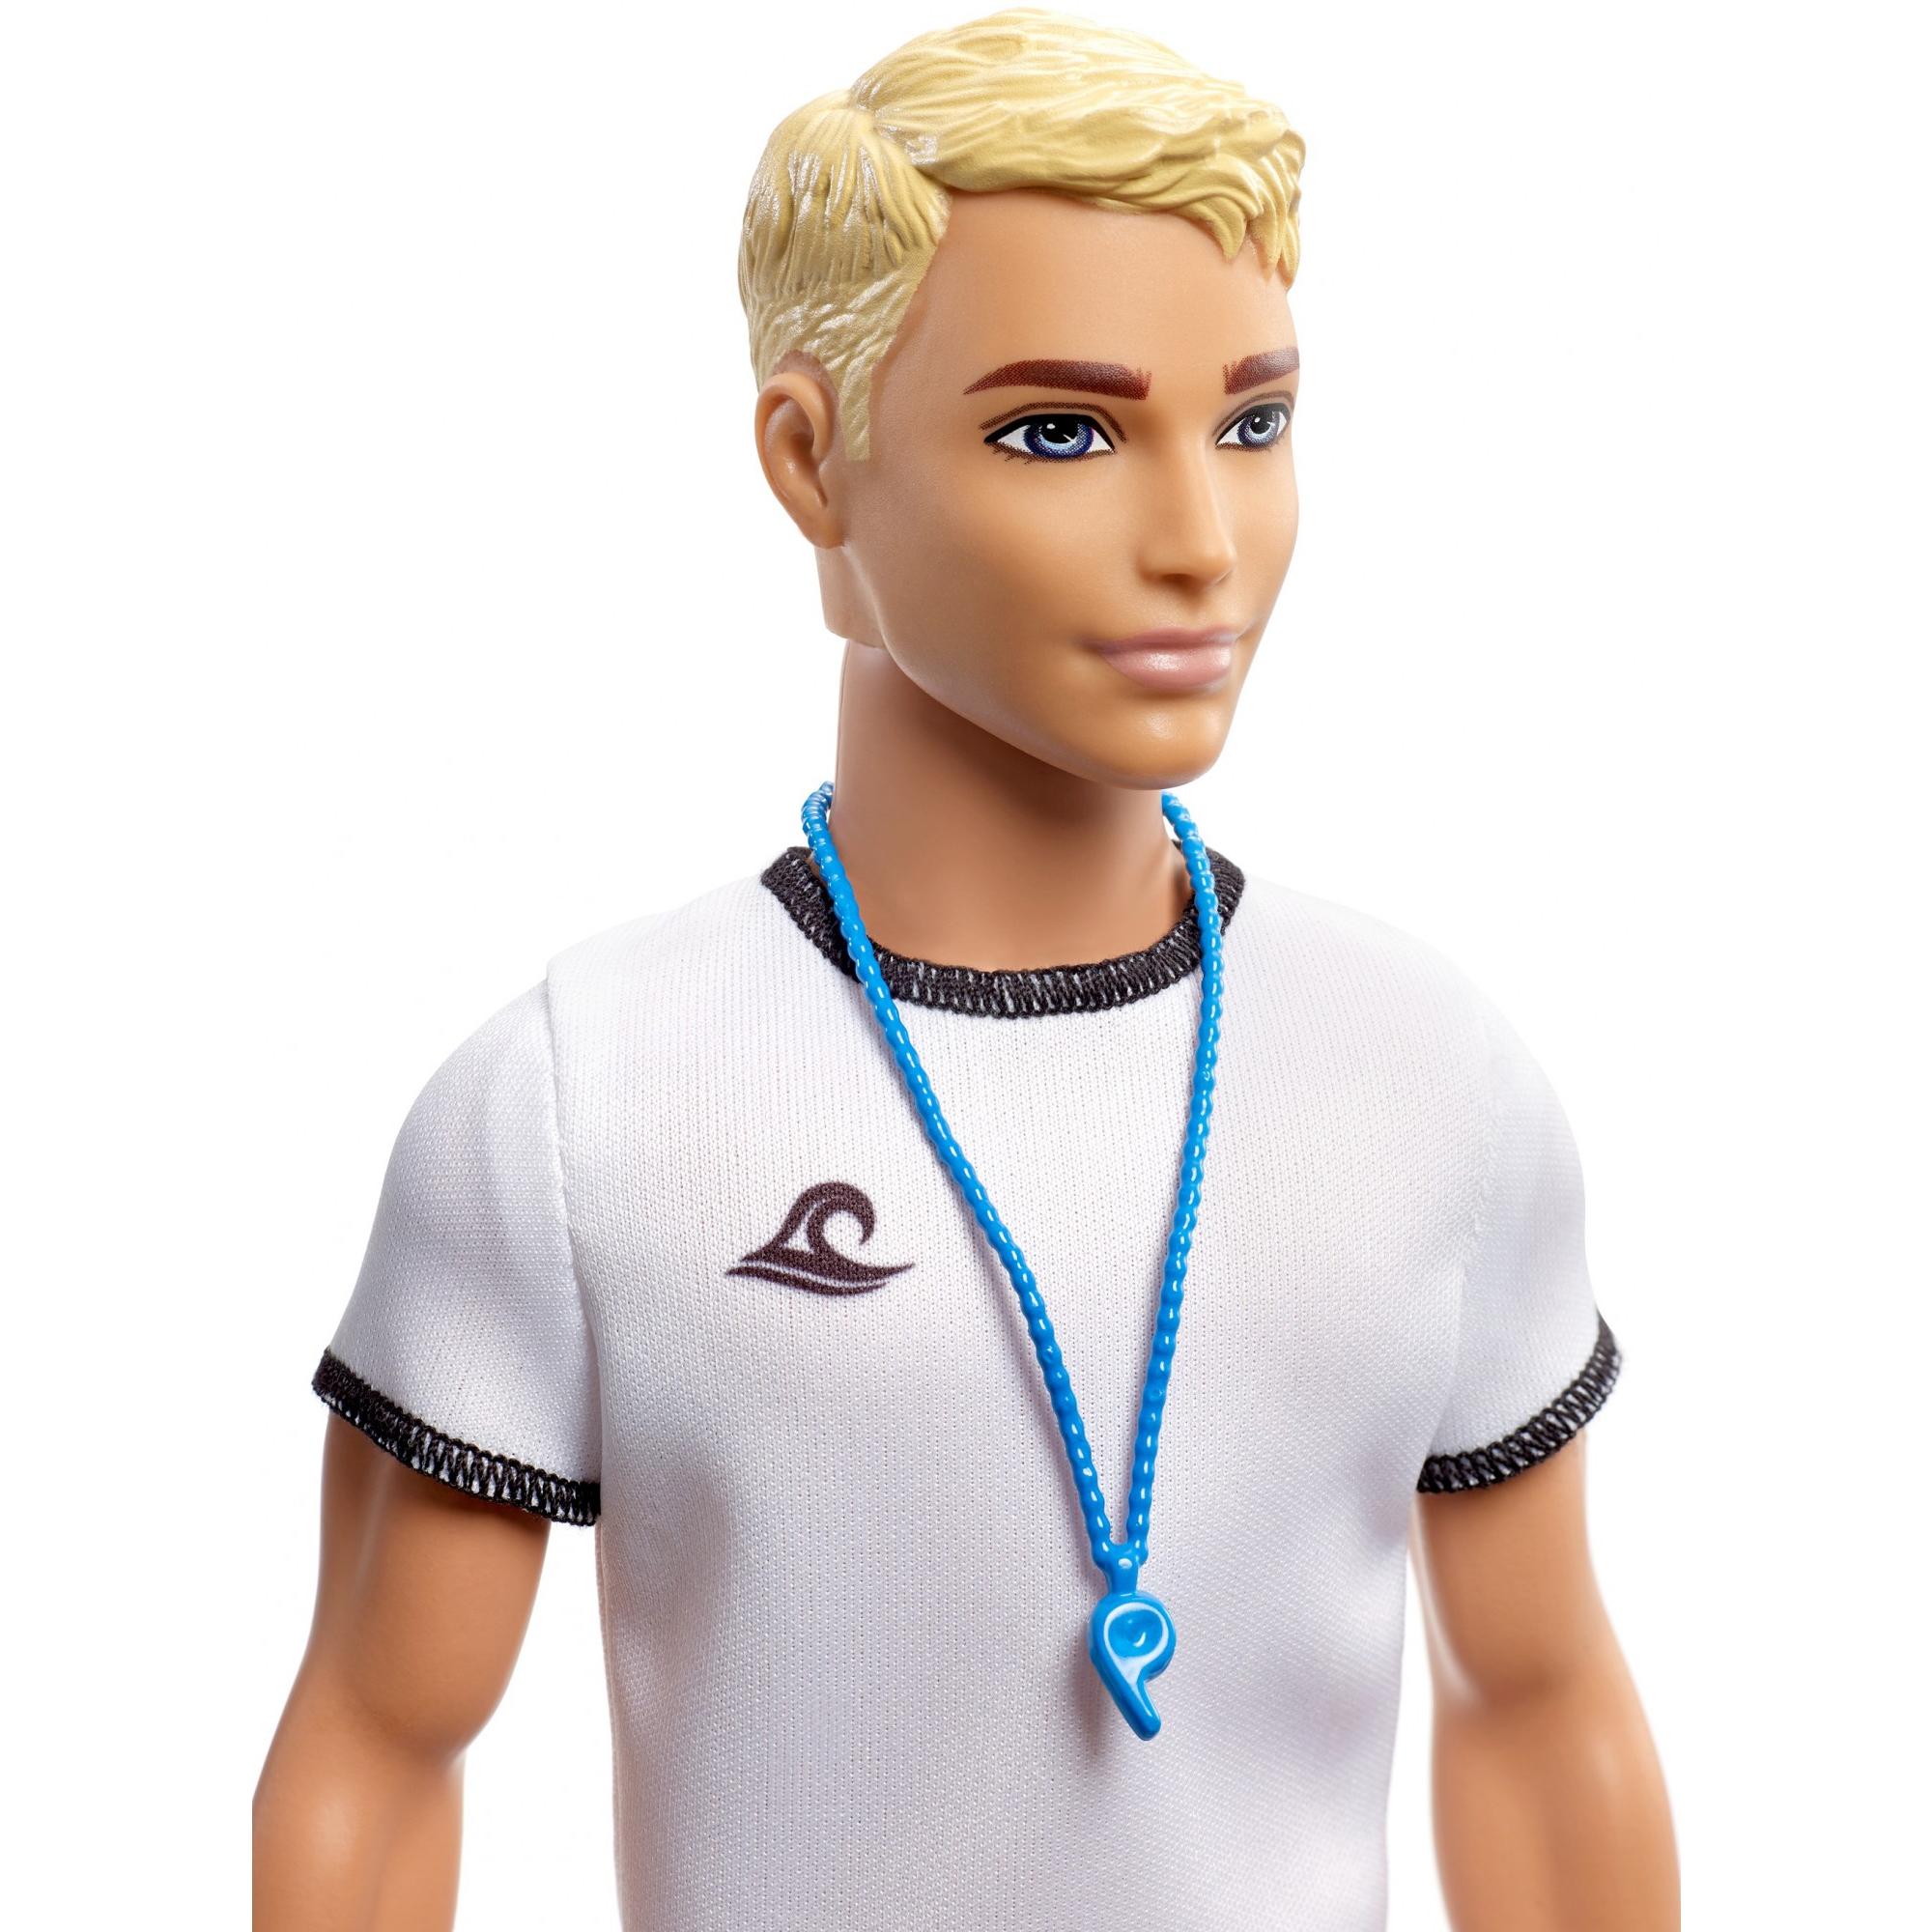 Barbie Ken Careers Lifeguard Doll with Career-Themed Accessories - image 3 of 6